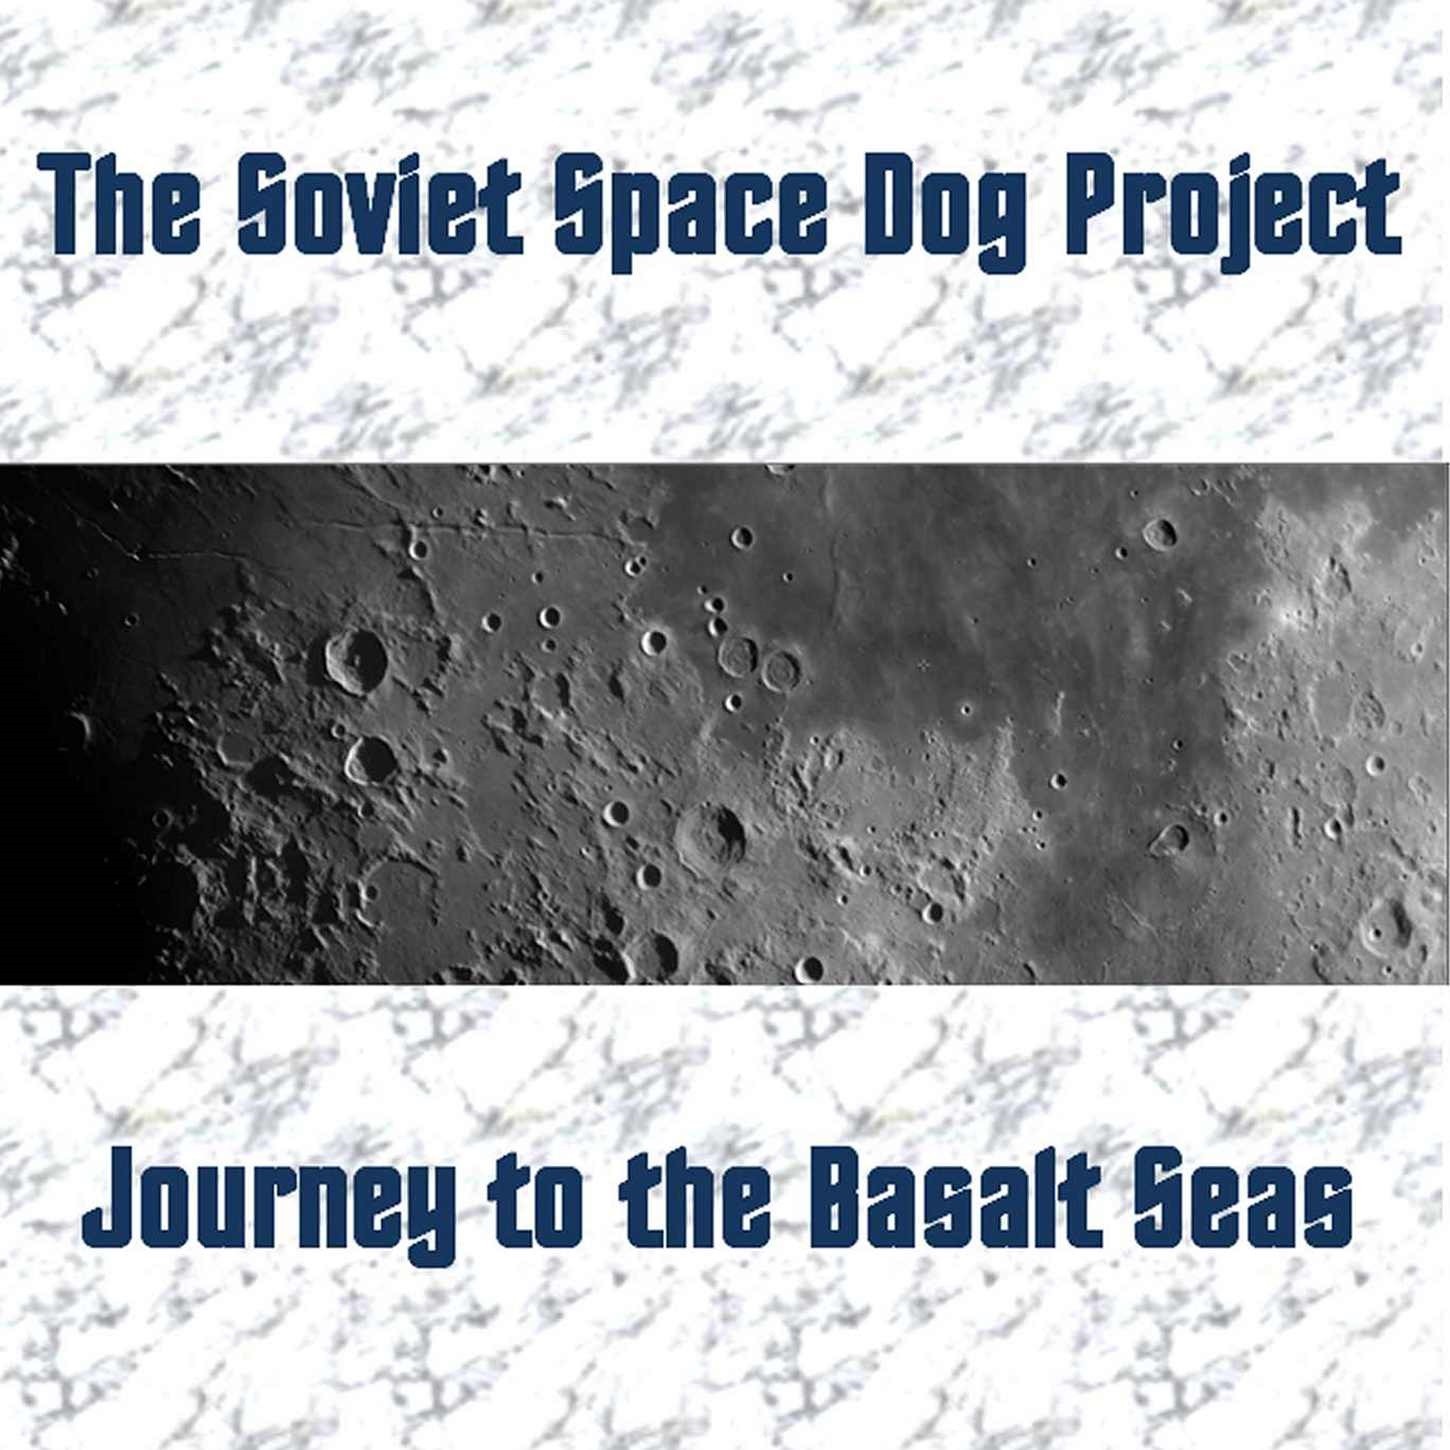 The Soviet Space Dog Project – Journey to the Basalt Seas (2019) [FLAC 24bit/44,1kHz]